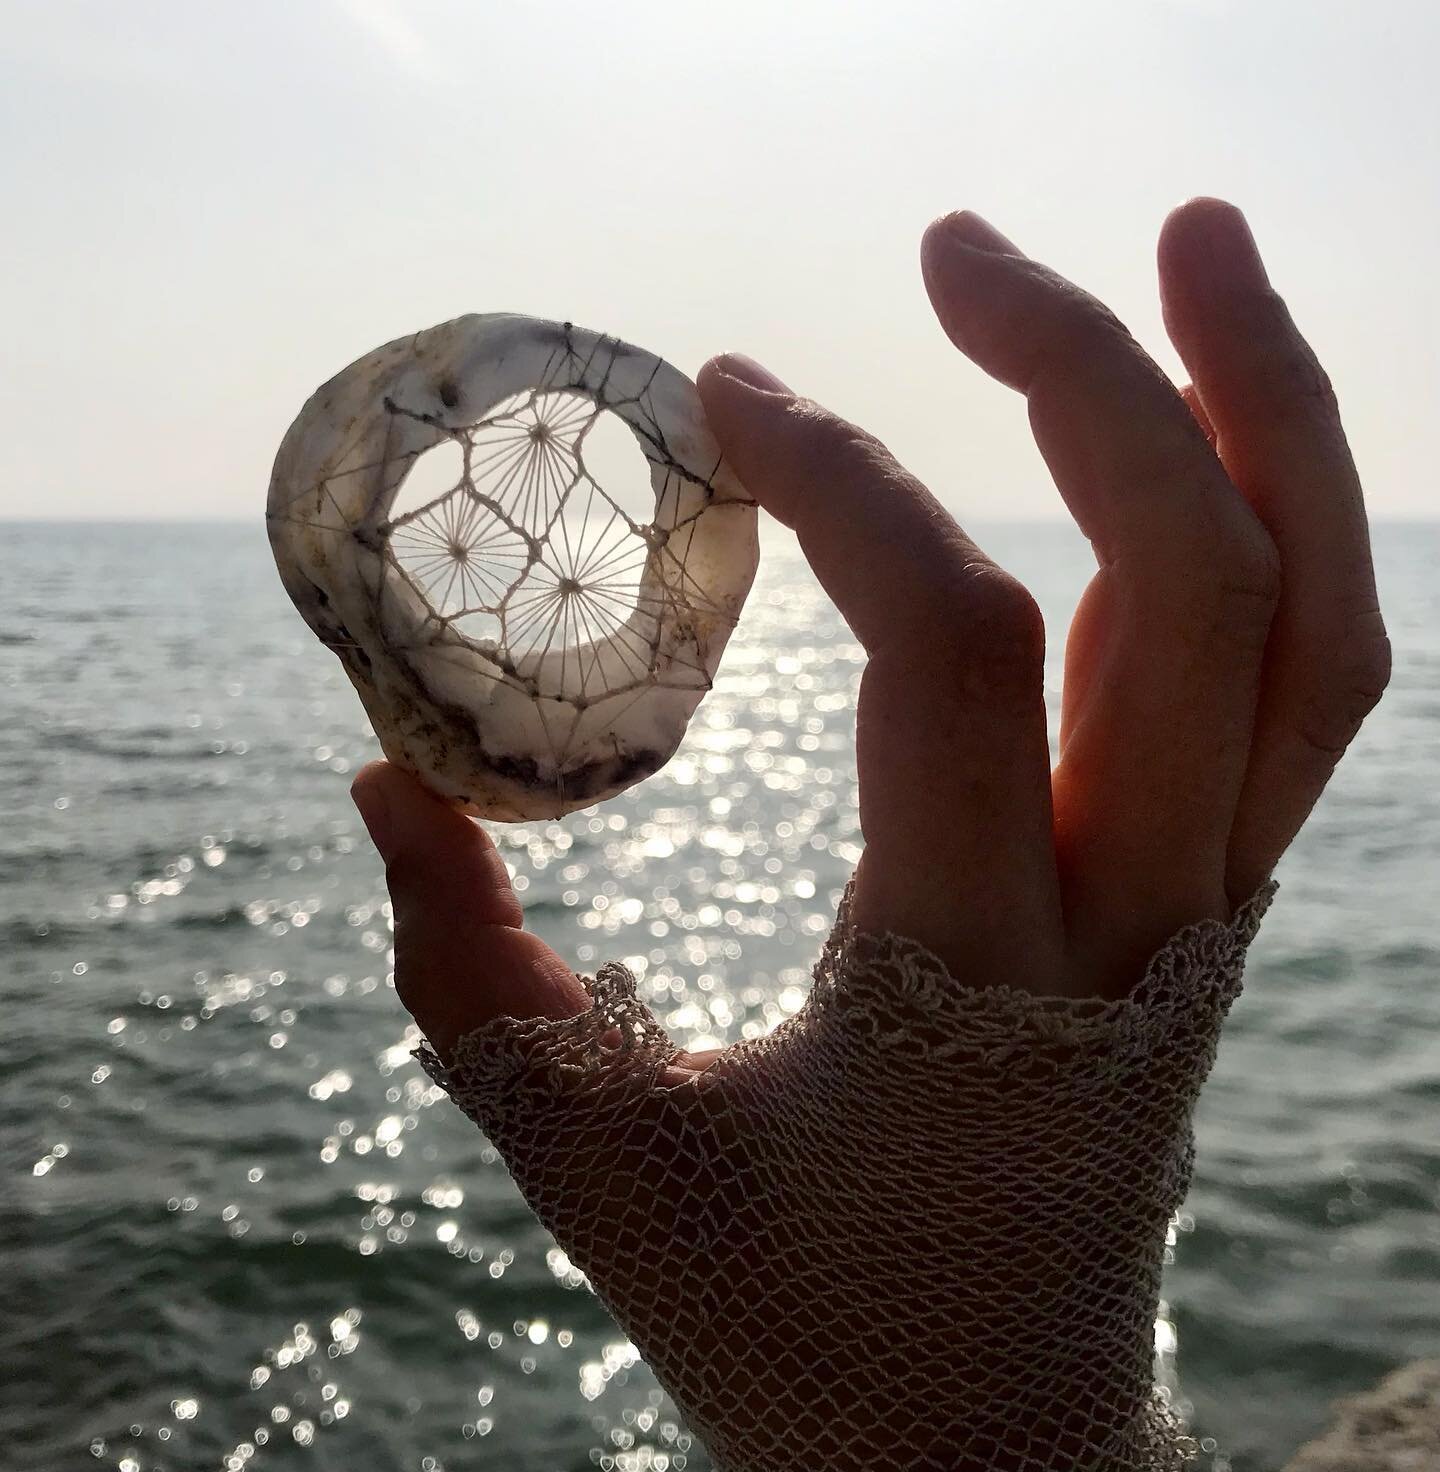 Dazzling light and a weathered shell stitched sculpture. Another glorious morning at #stleonardsonsea ... This one turned out like a little #barbarahepworth .... maybe she was watching me stitch by the sea... 

#light #beach #stitched #weaved #shells